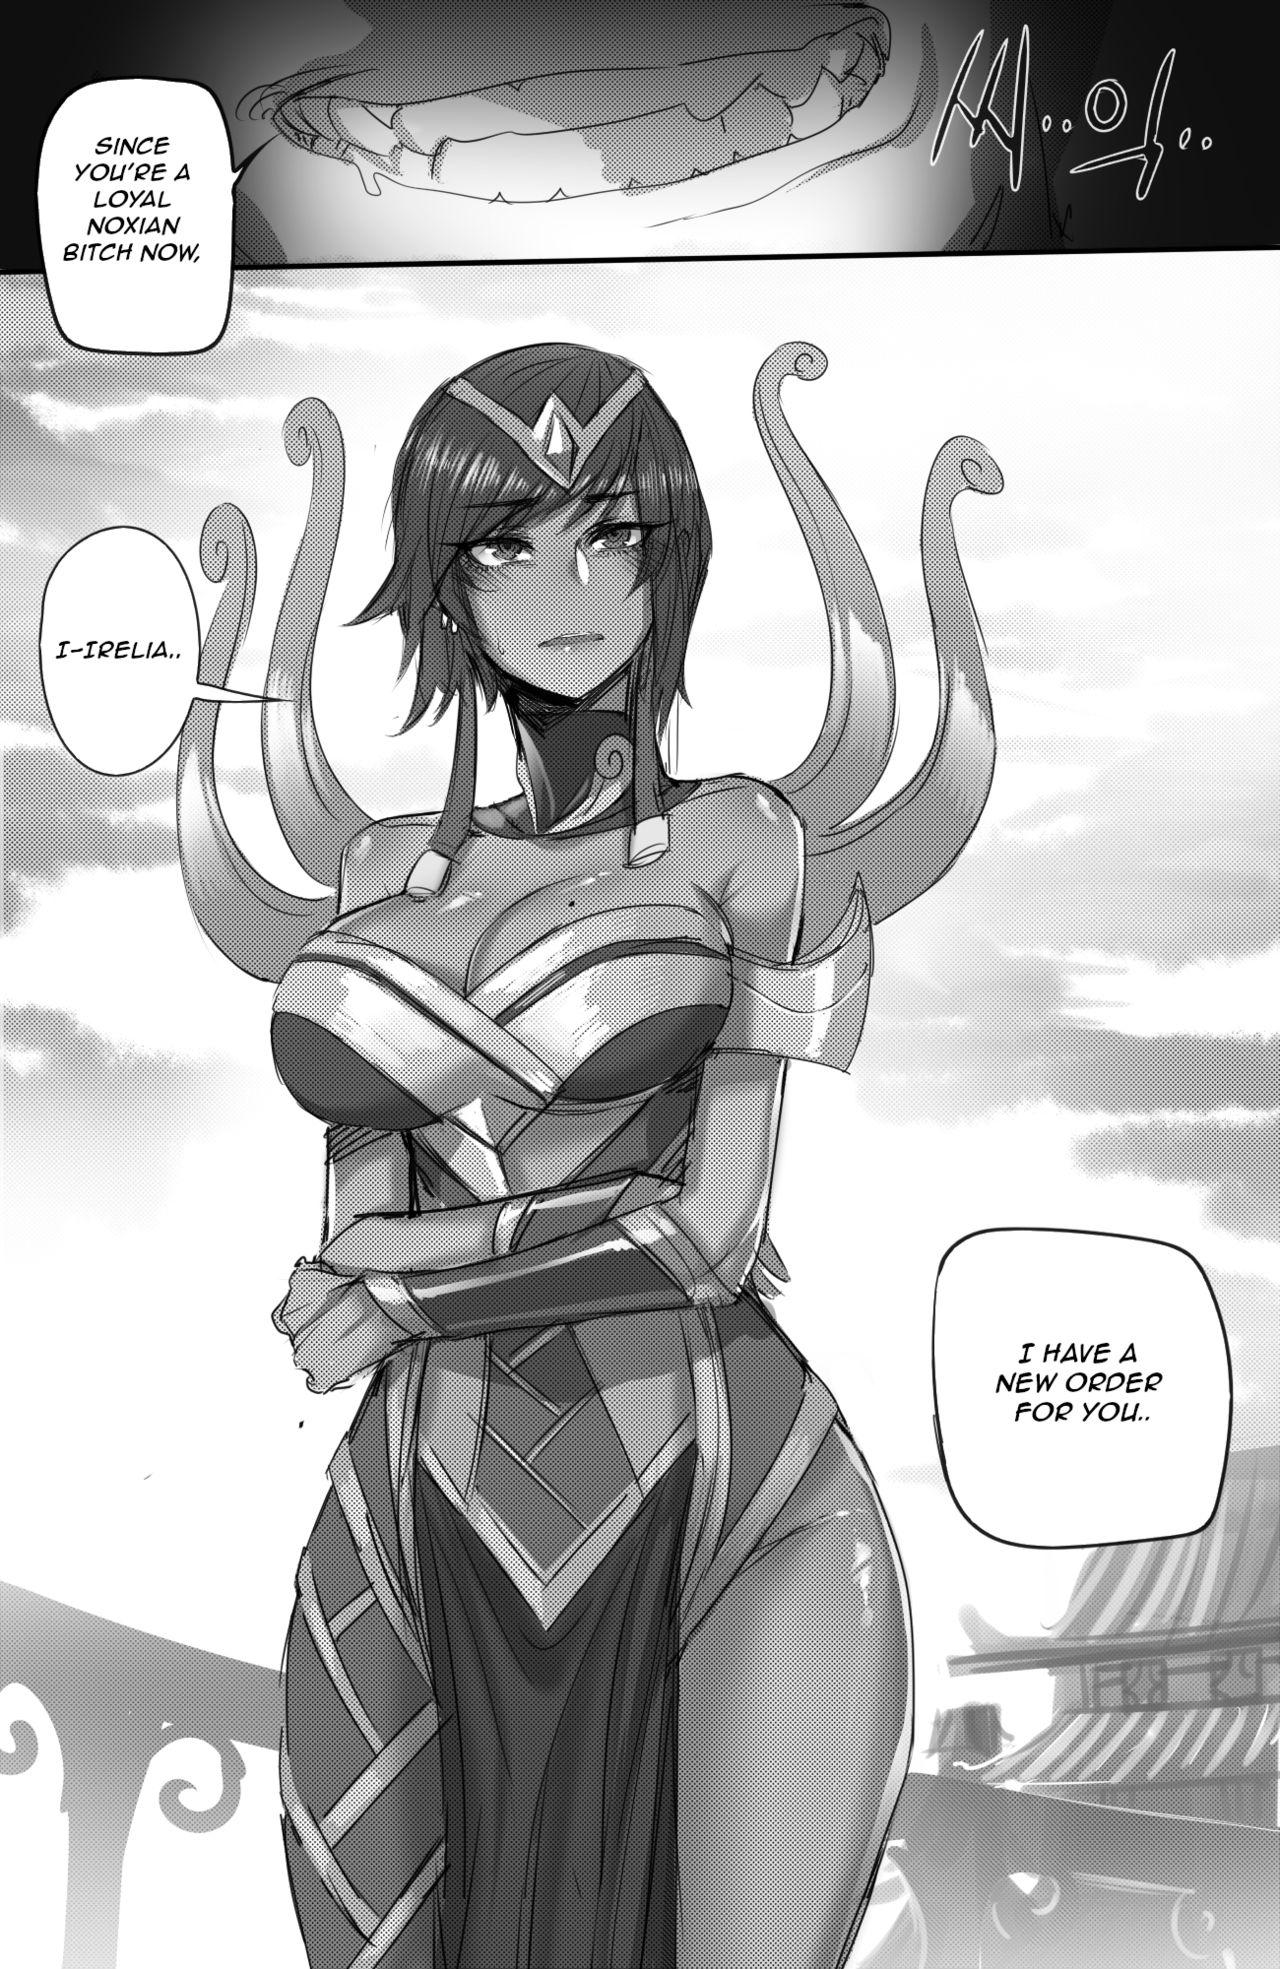 Athletic The Fall of Irelia 2 - League of legends Animation - Page 24